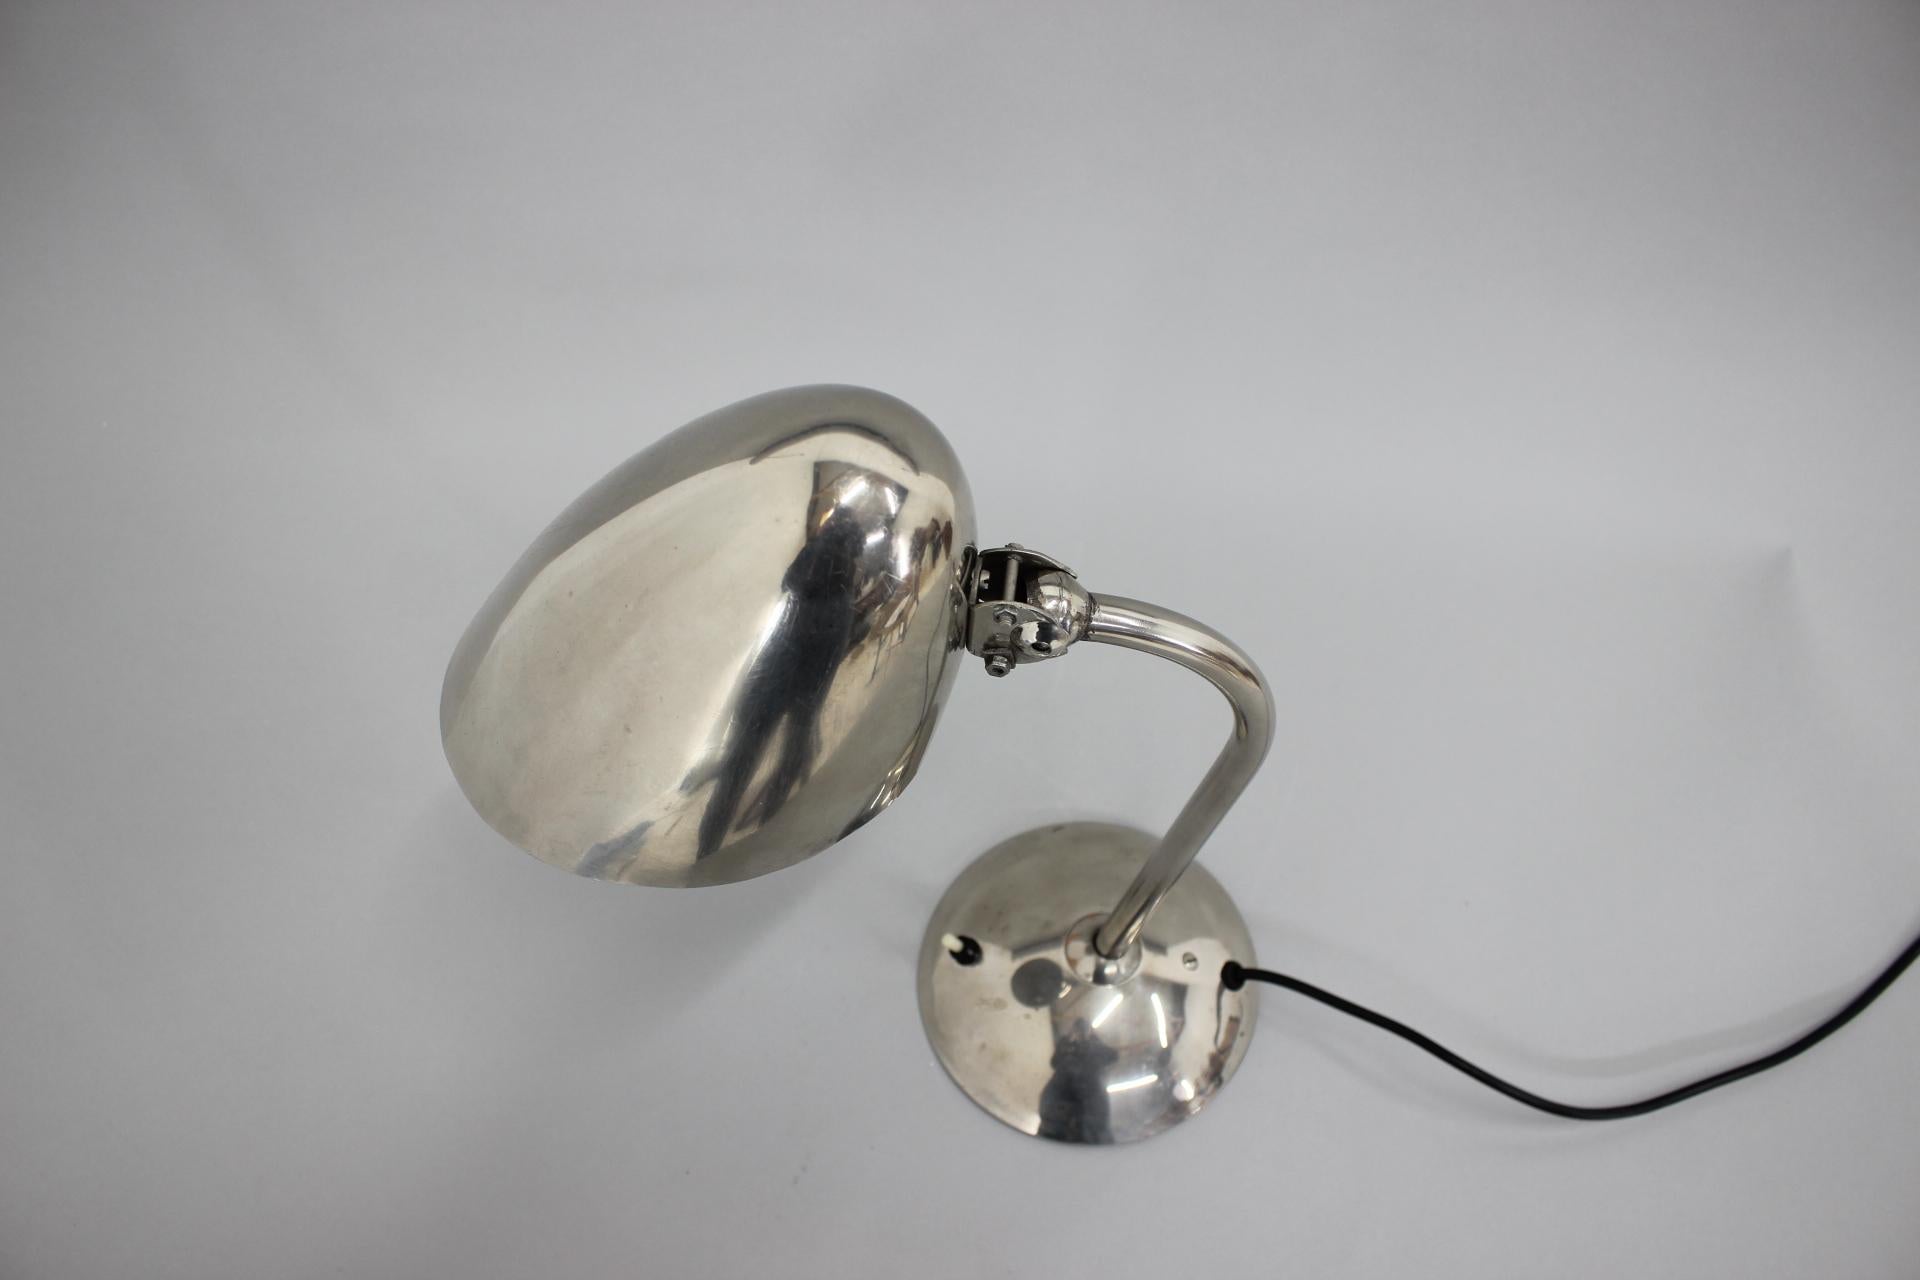 Functionalist Table Lamp, Czechoslovakia, 1930s In Good Condition For Sale In Praha, CZ